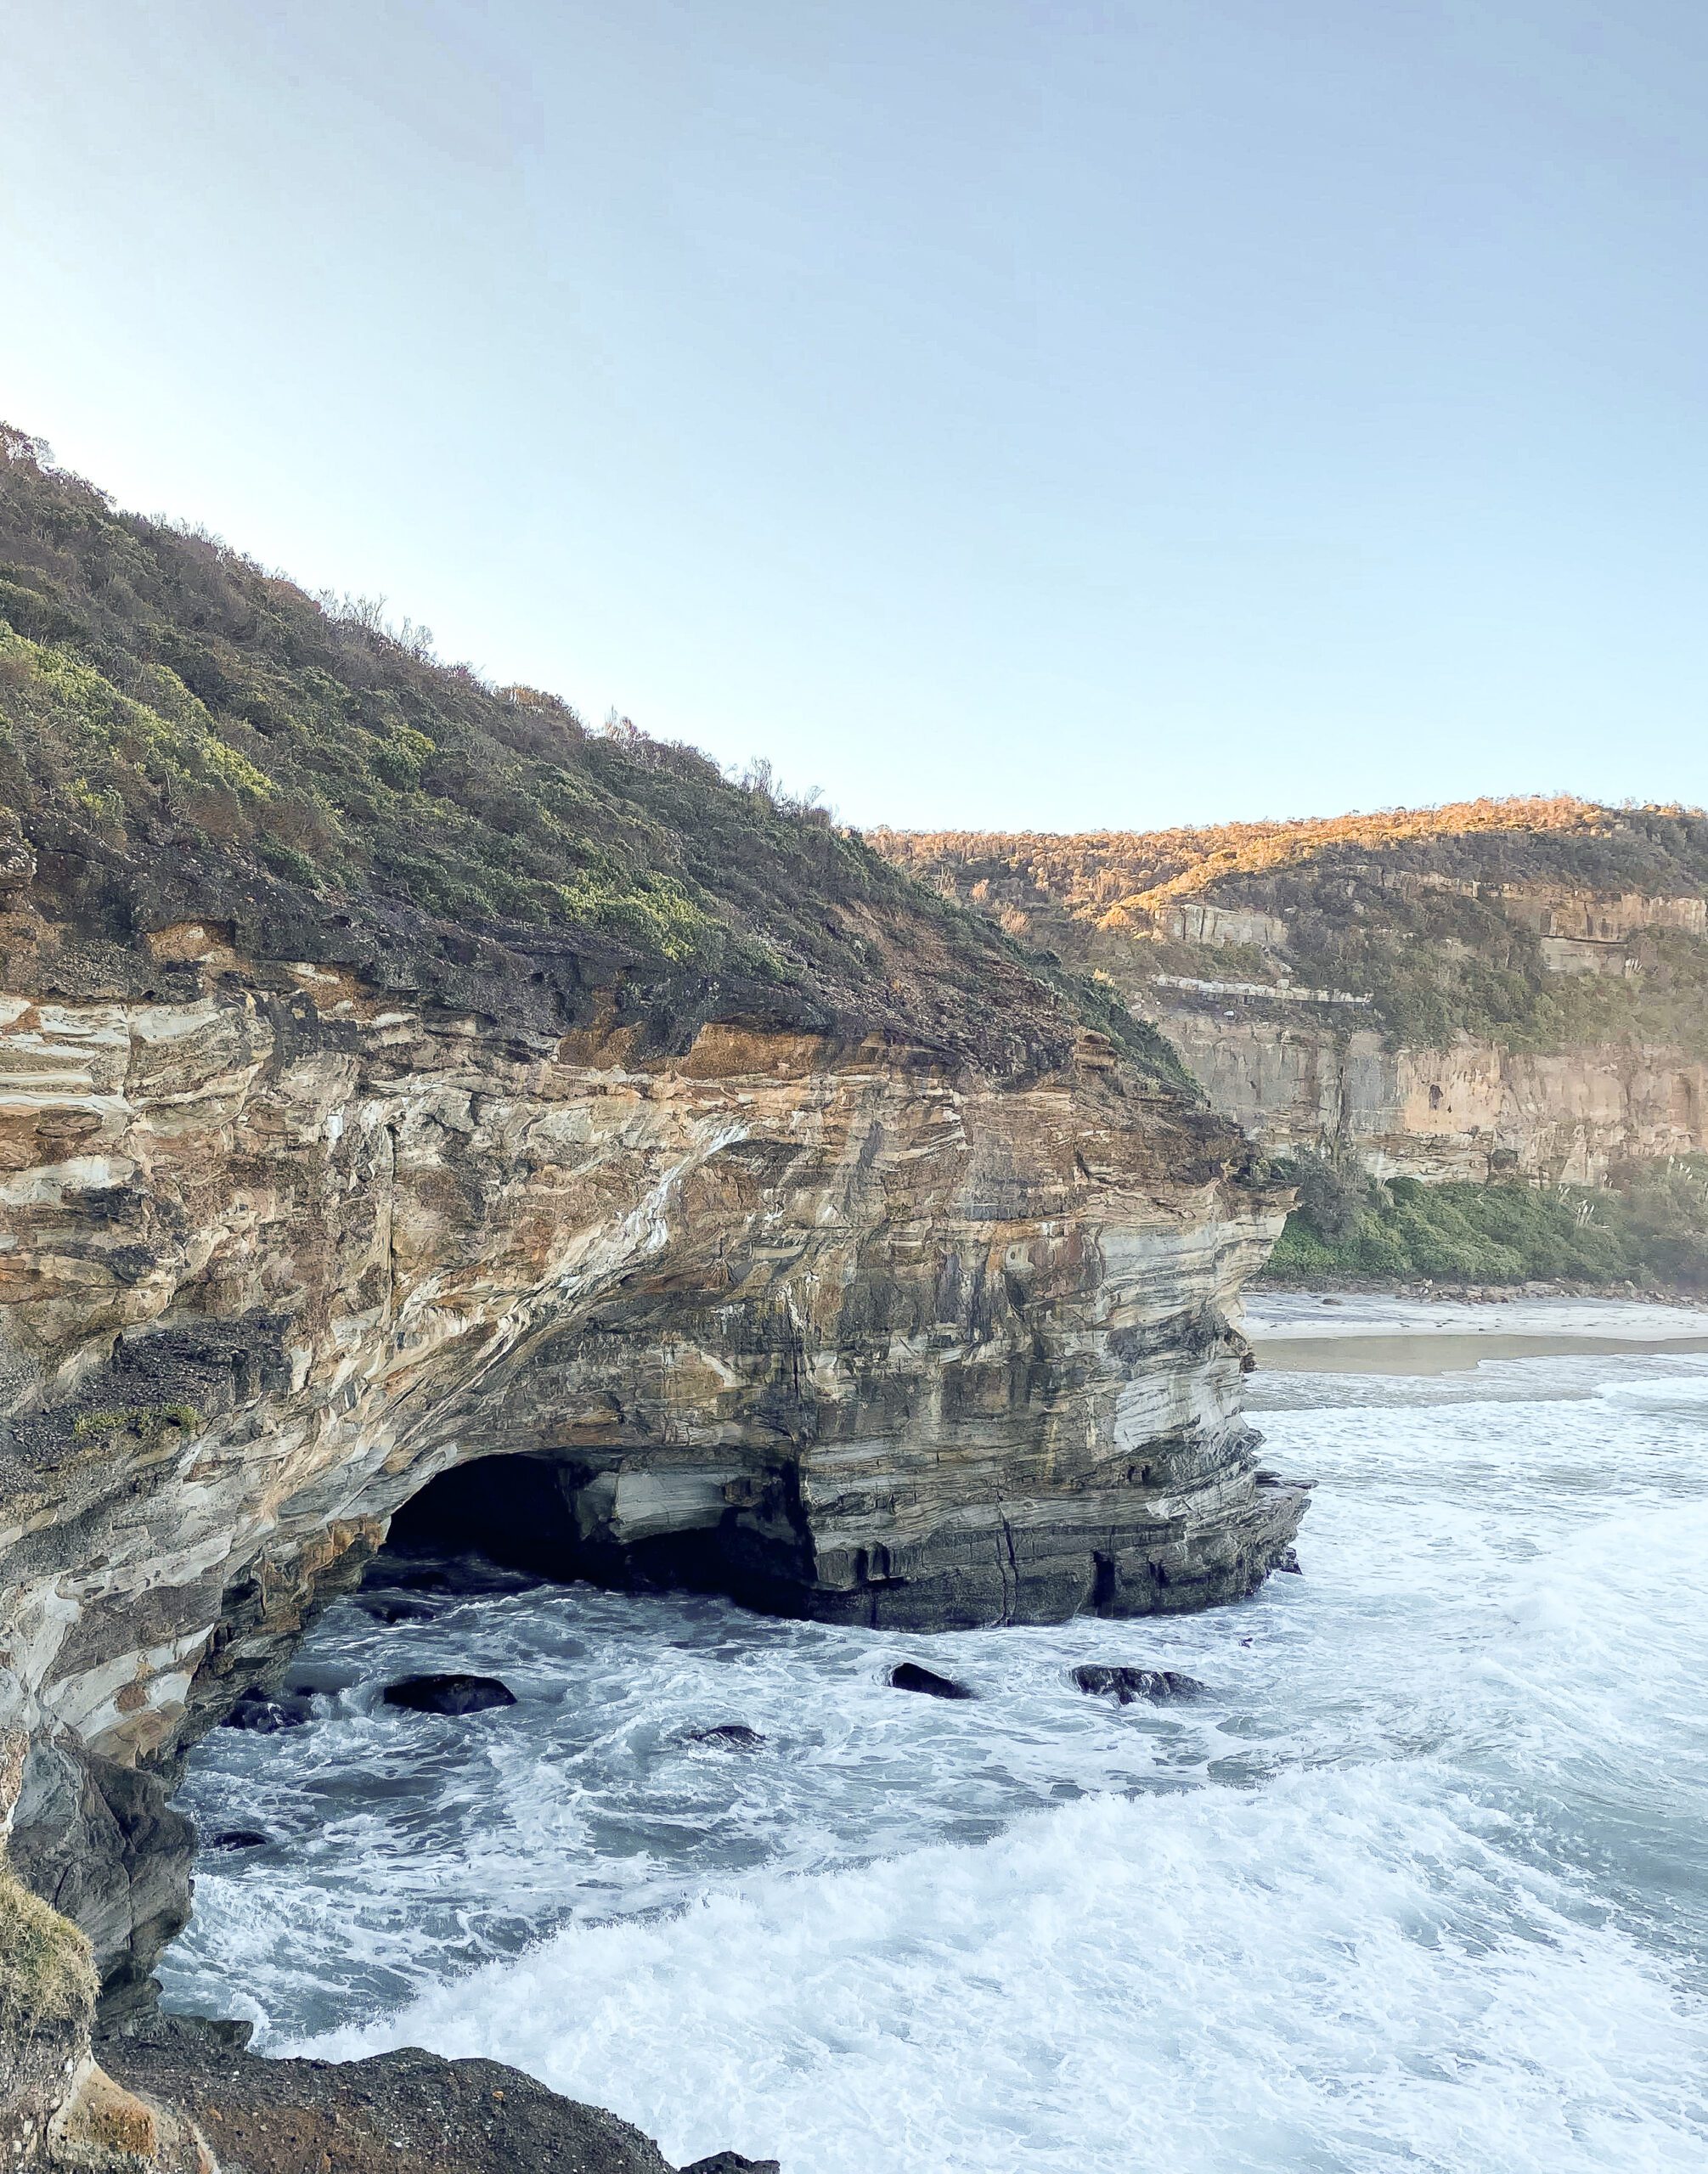 Ghosties beach is a secluded beach and features a sea cave.